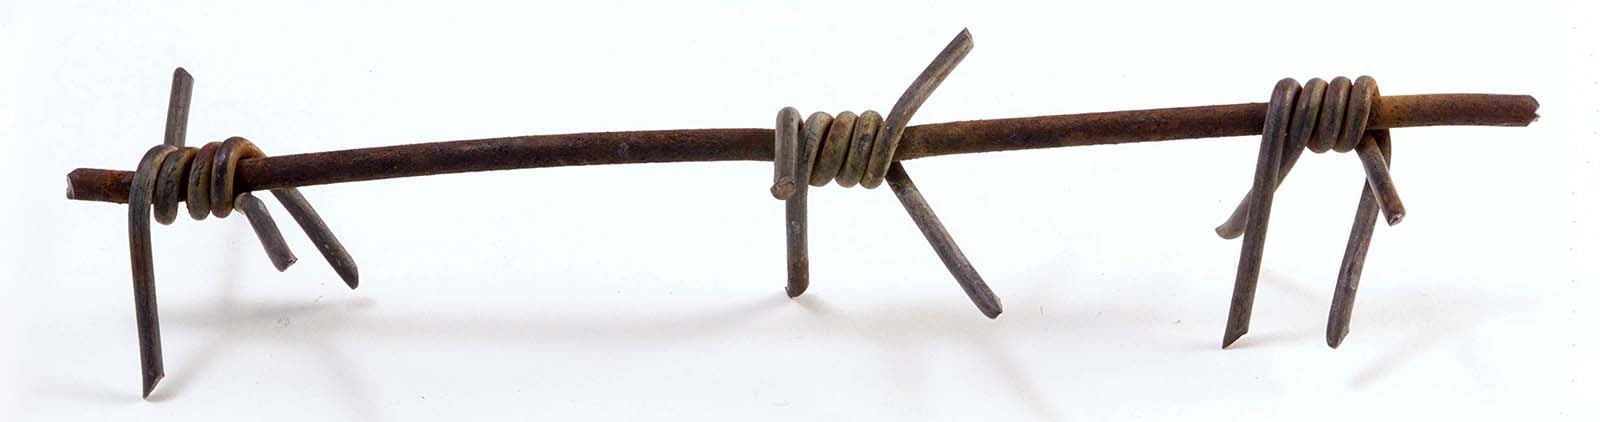 Barbed wire sample from the Buffalo Bill Museum collection. 1.69.1930.22